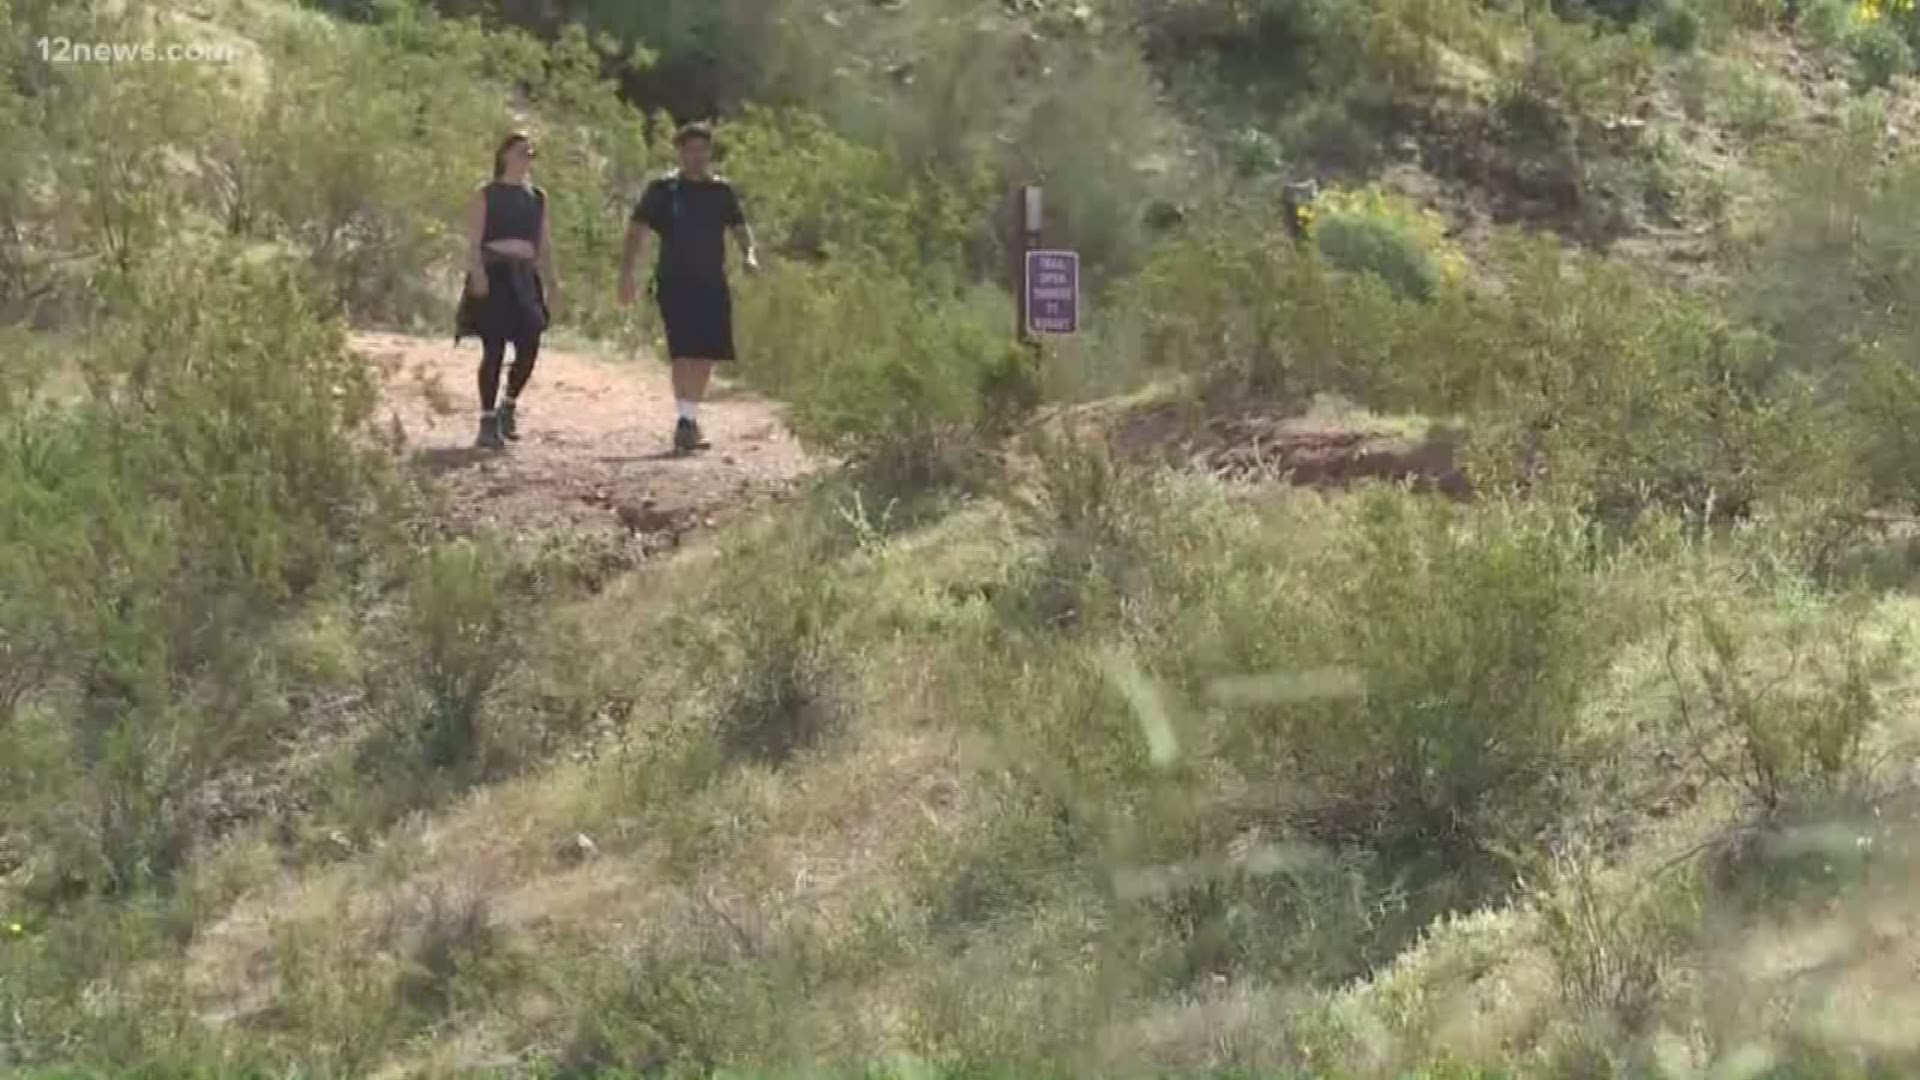 There are concerns because of the number of people who are going to trails and parks across Arizona amid a coronavirus outbreak. Team 12's Rachel Cole has the latest